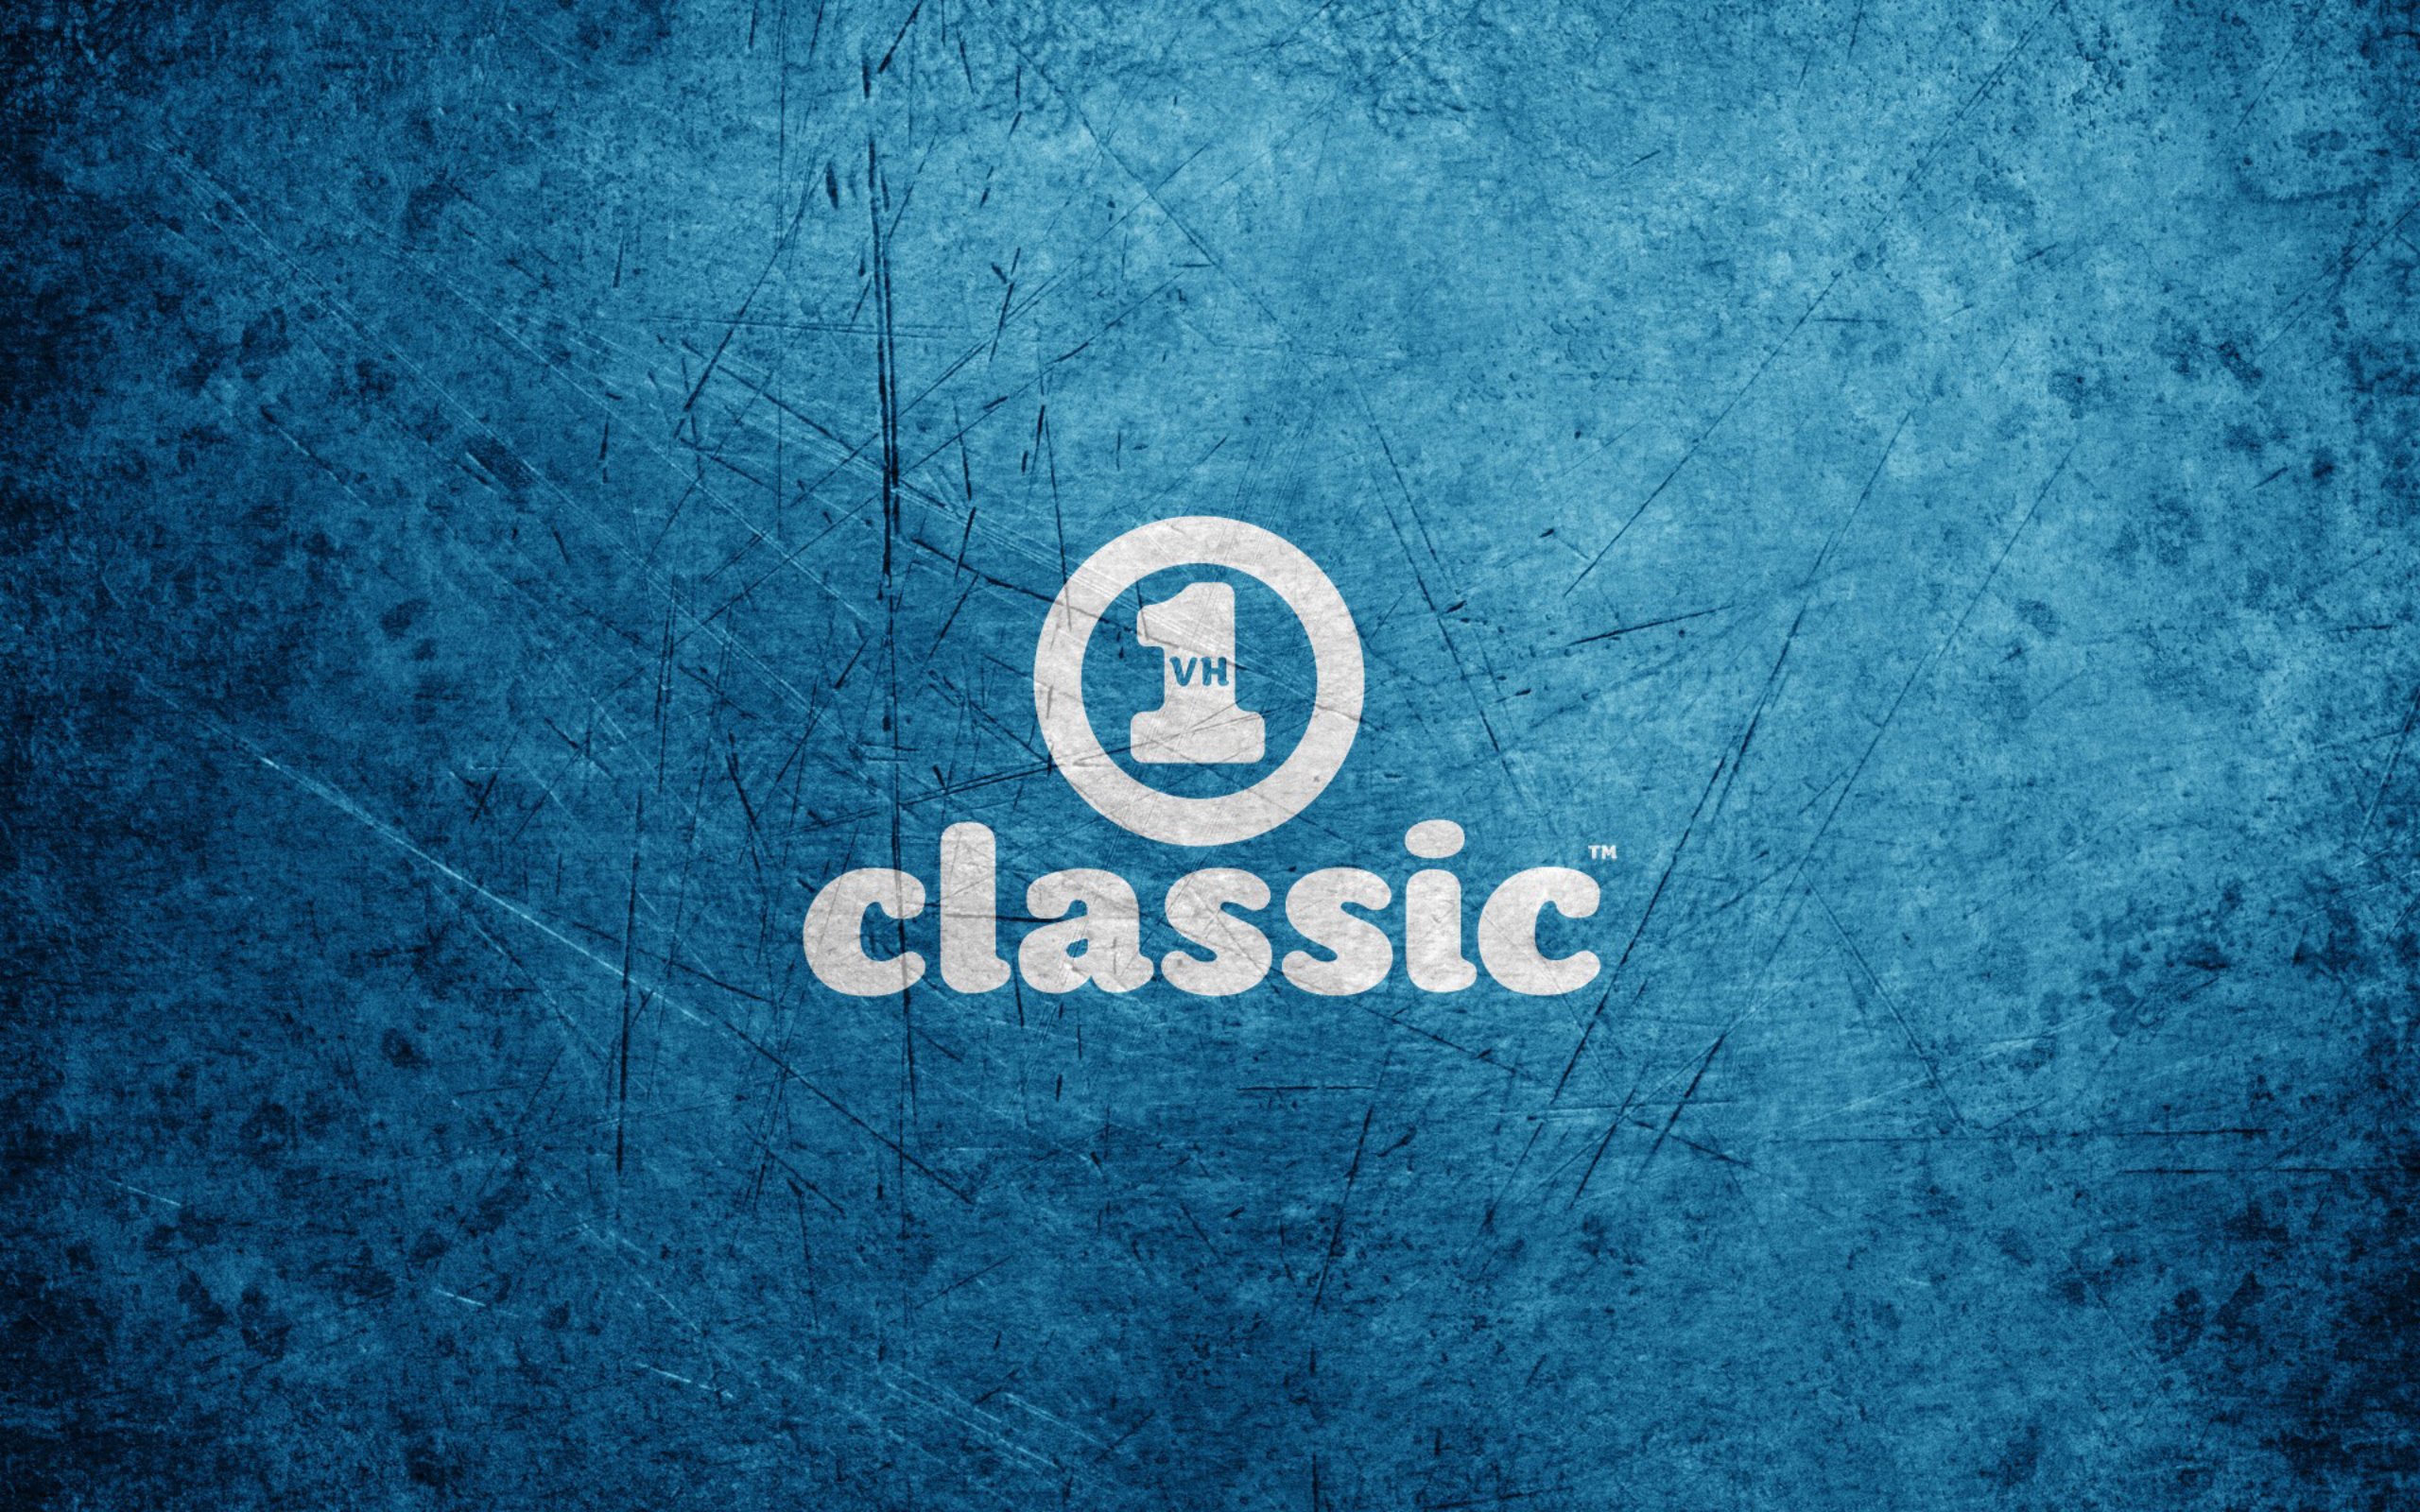 Mac HD Wallpaper From Vh1 Classic Background Music